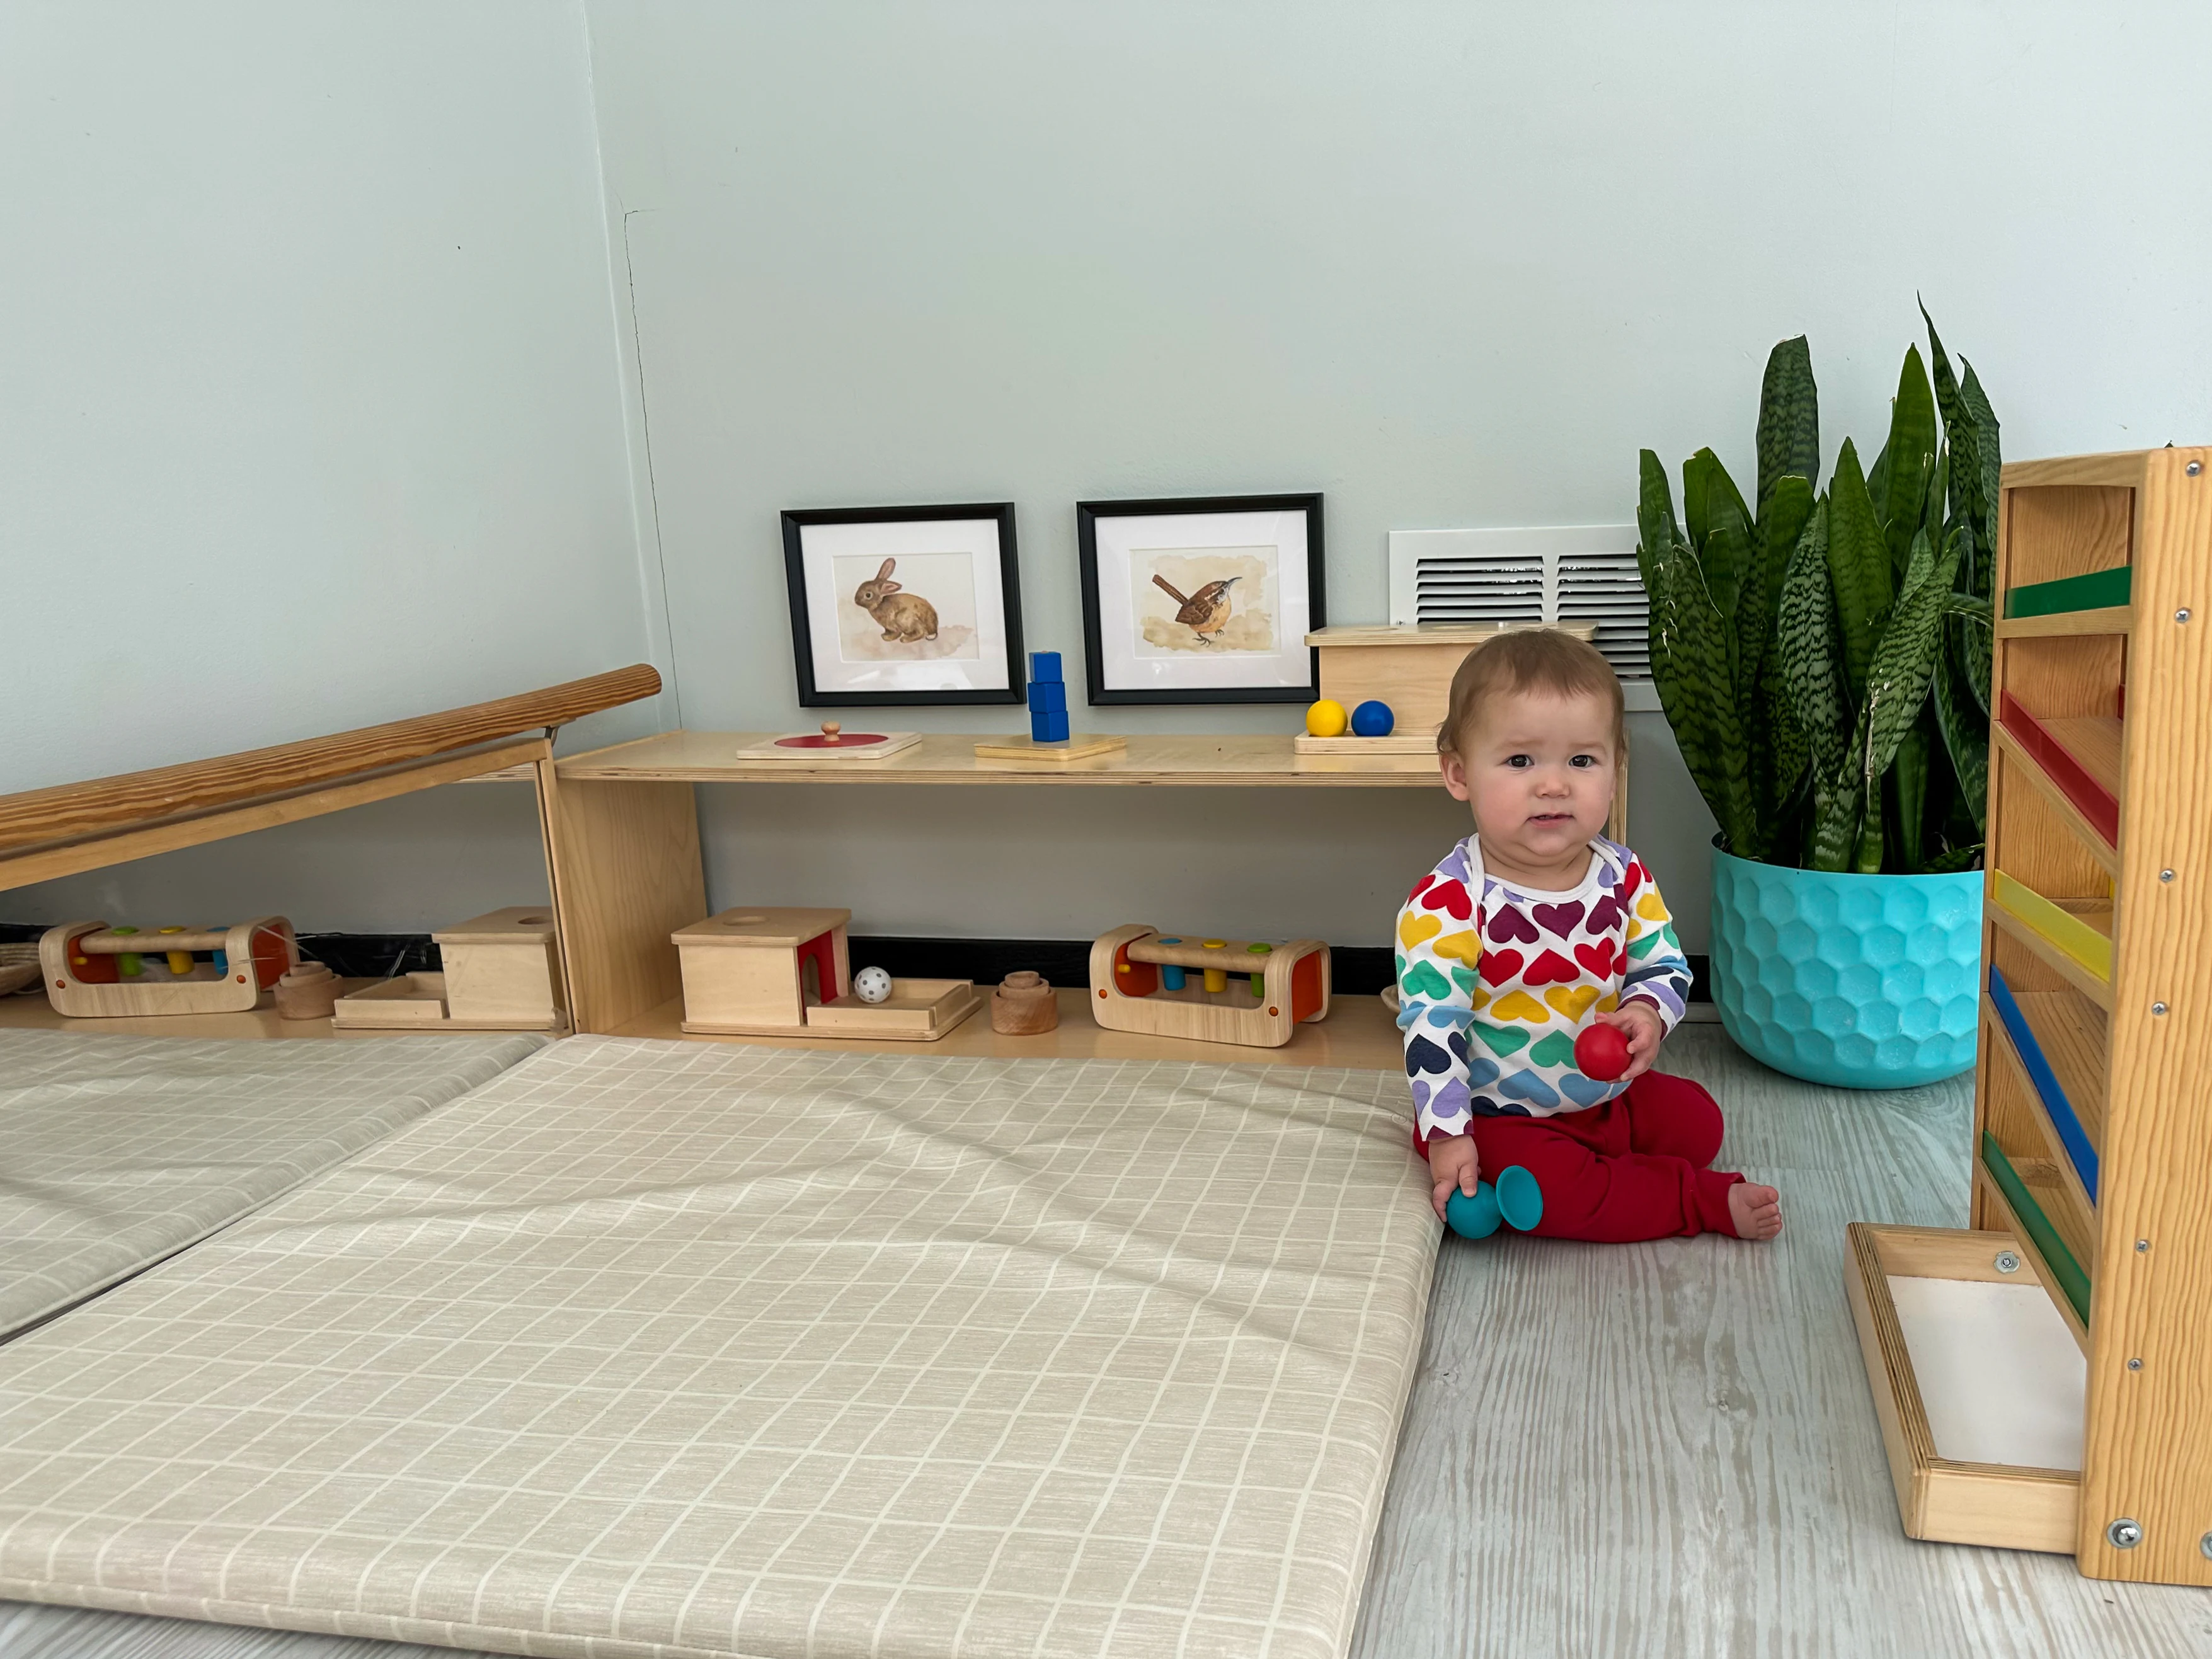 Montessori baby sits in front of playroom shelf filled with activities and toys. Montessori playspace for older baby includes mat, mirror, and wooden toys.